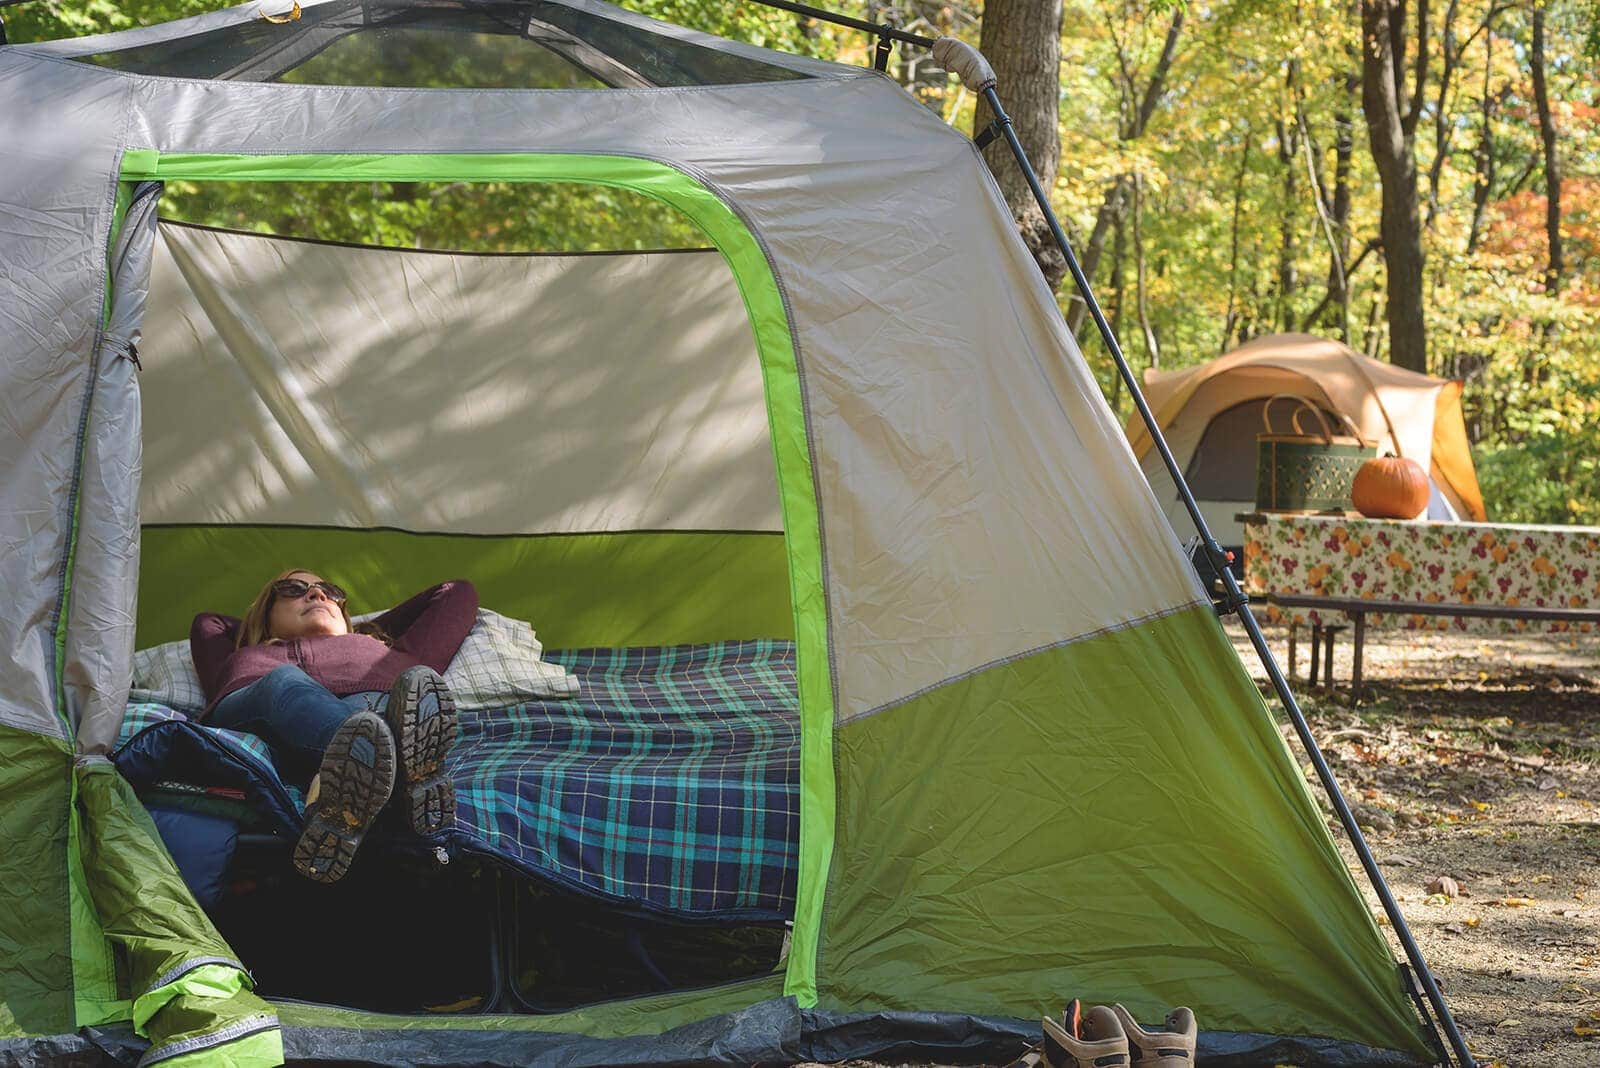 The Kamp Rite Double Tent Cot Reviewed For 2022 For The Money.